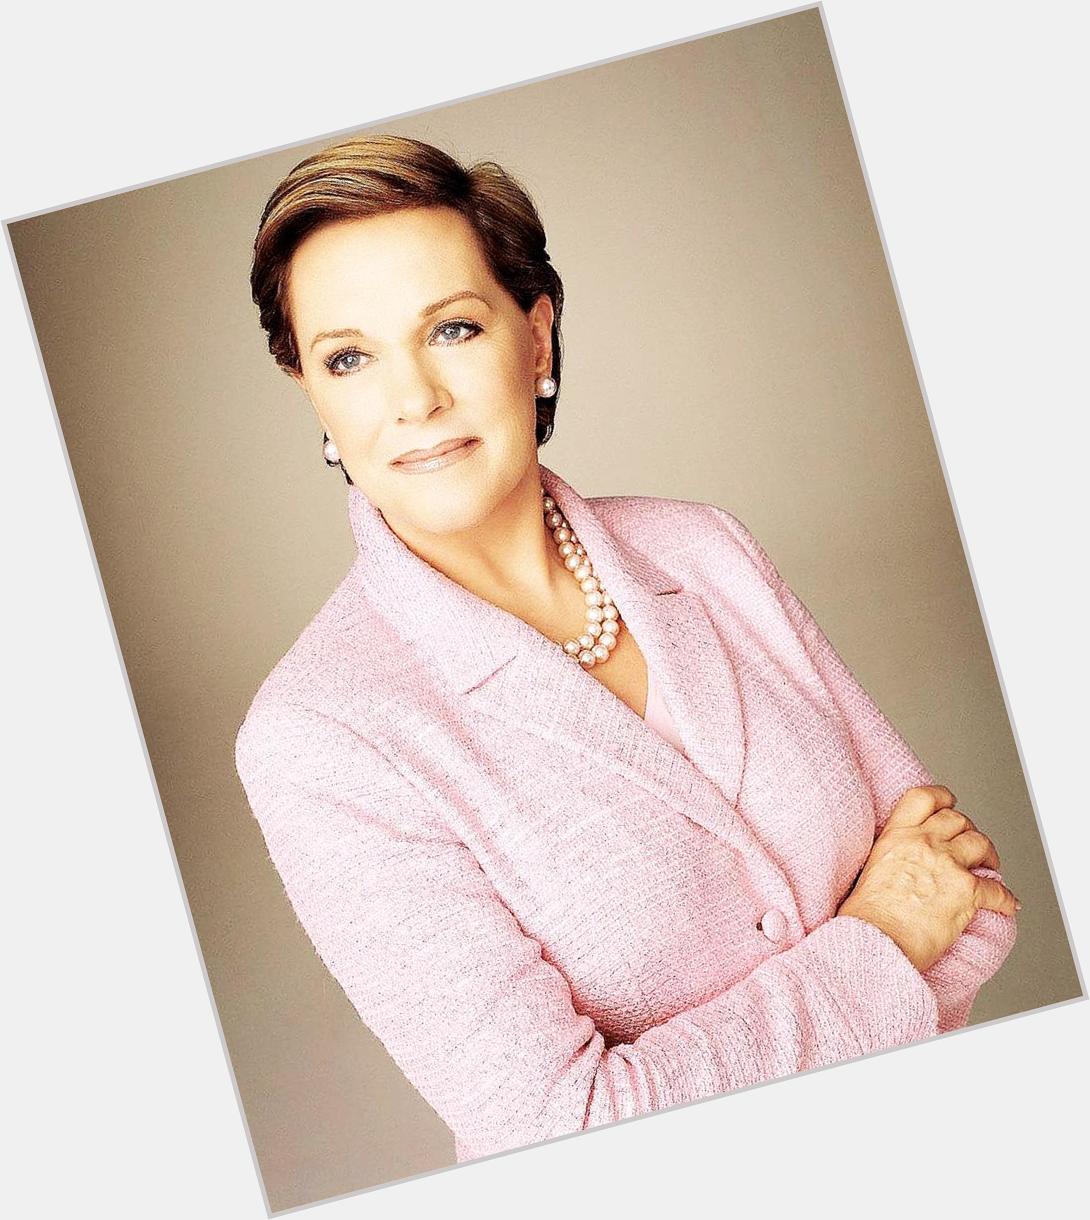 HAPPY BIRTHDAY to Dame Julie Andrews, the most wonderful person who has inspired me and made me so happy!!        